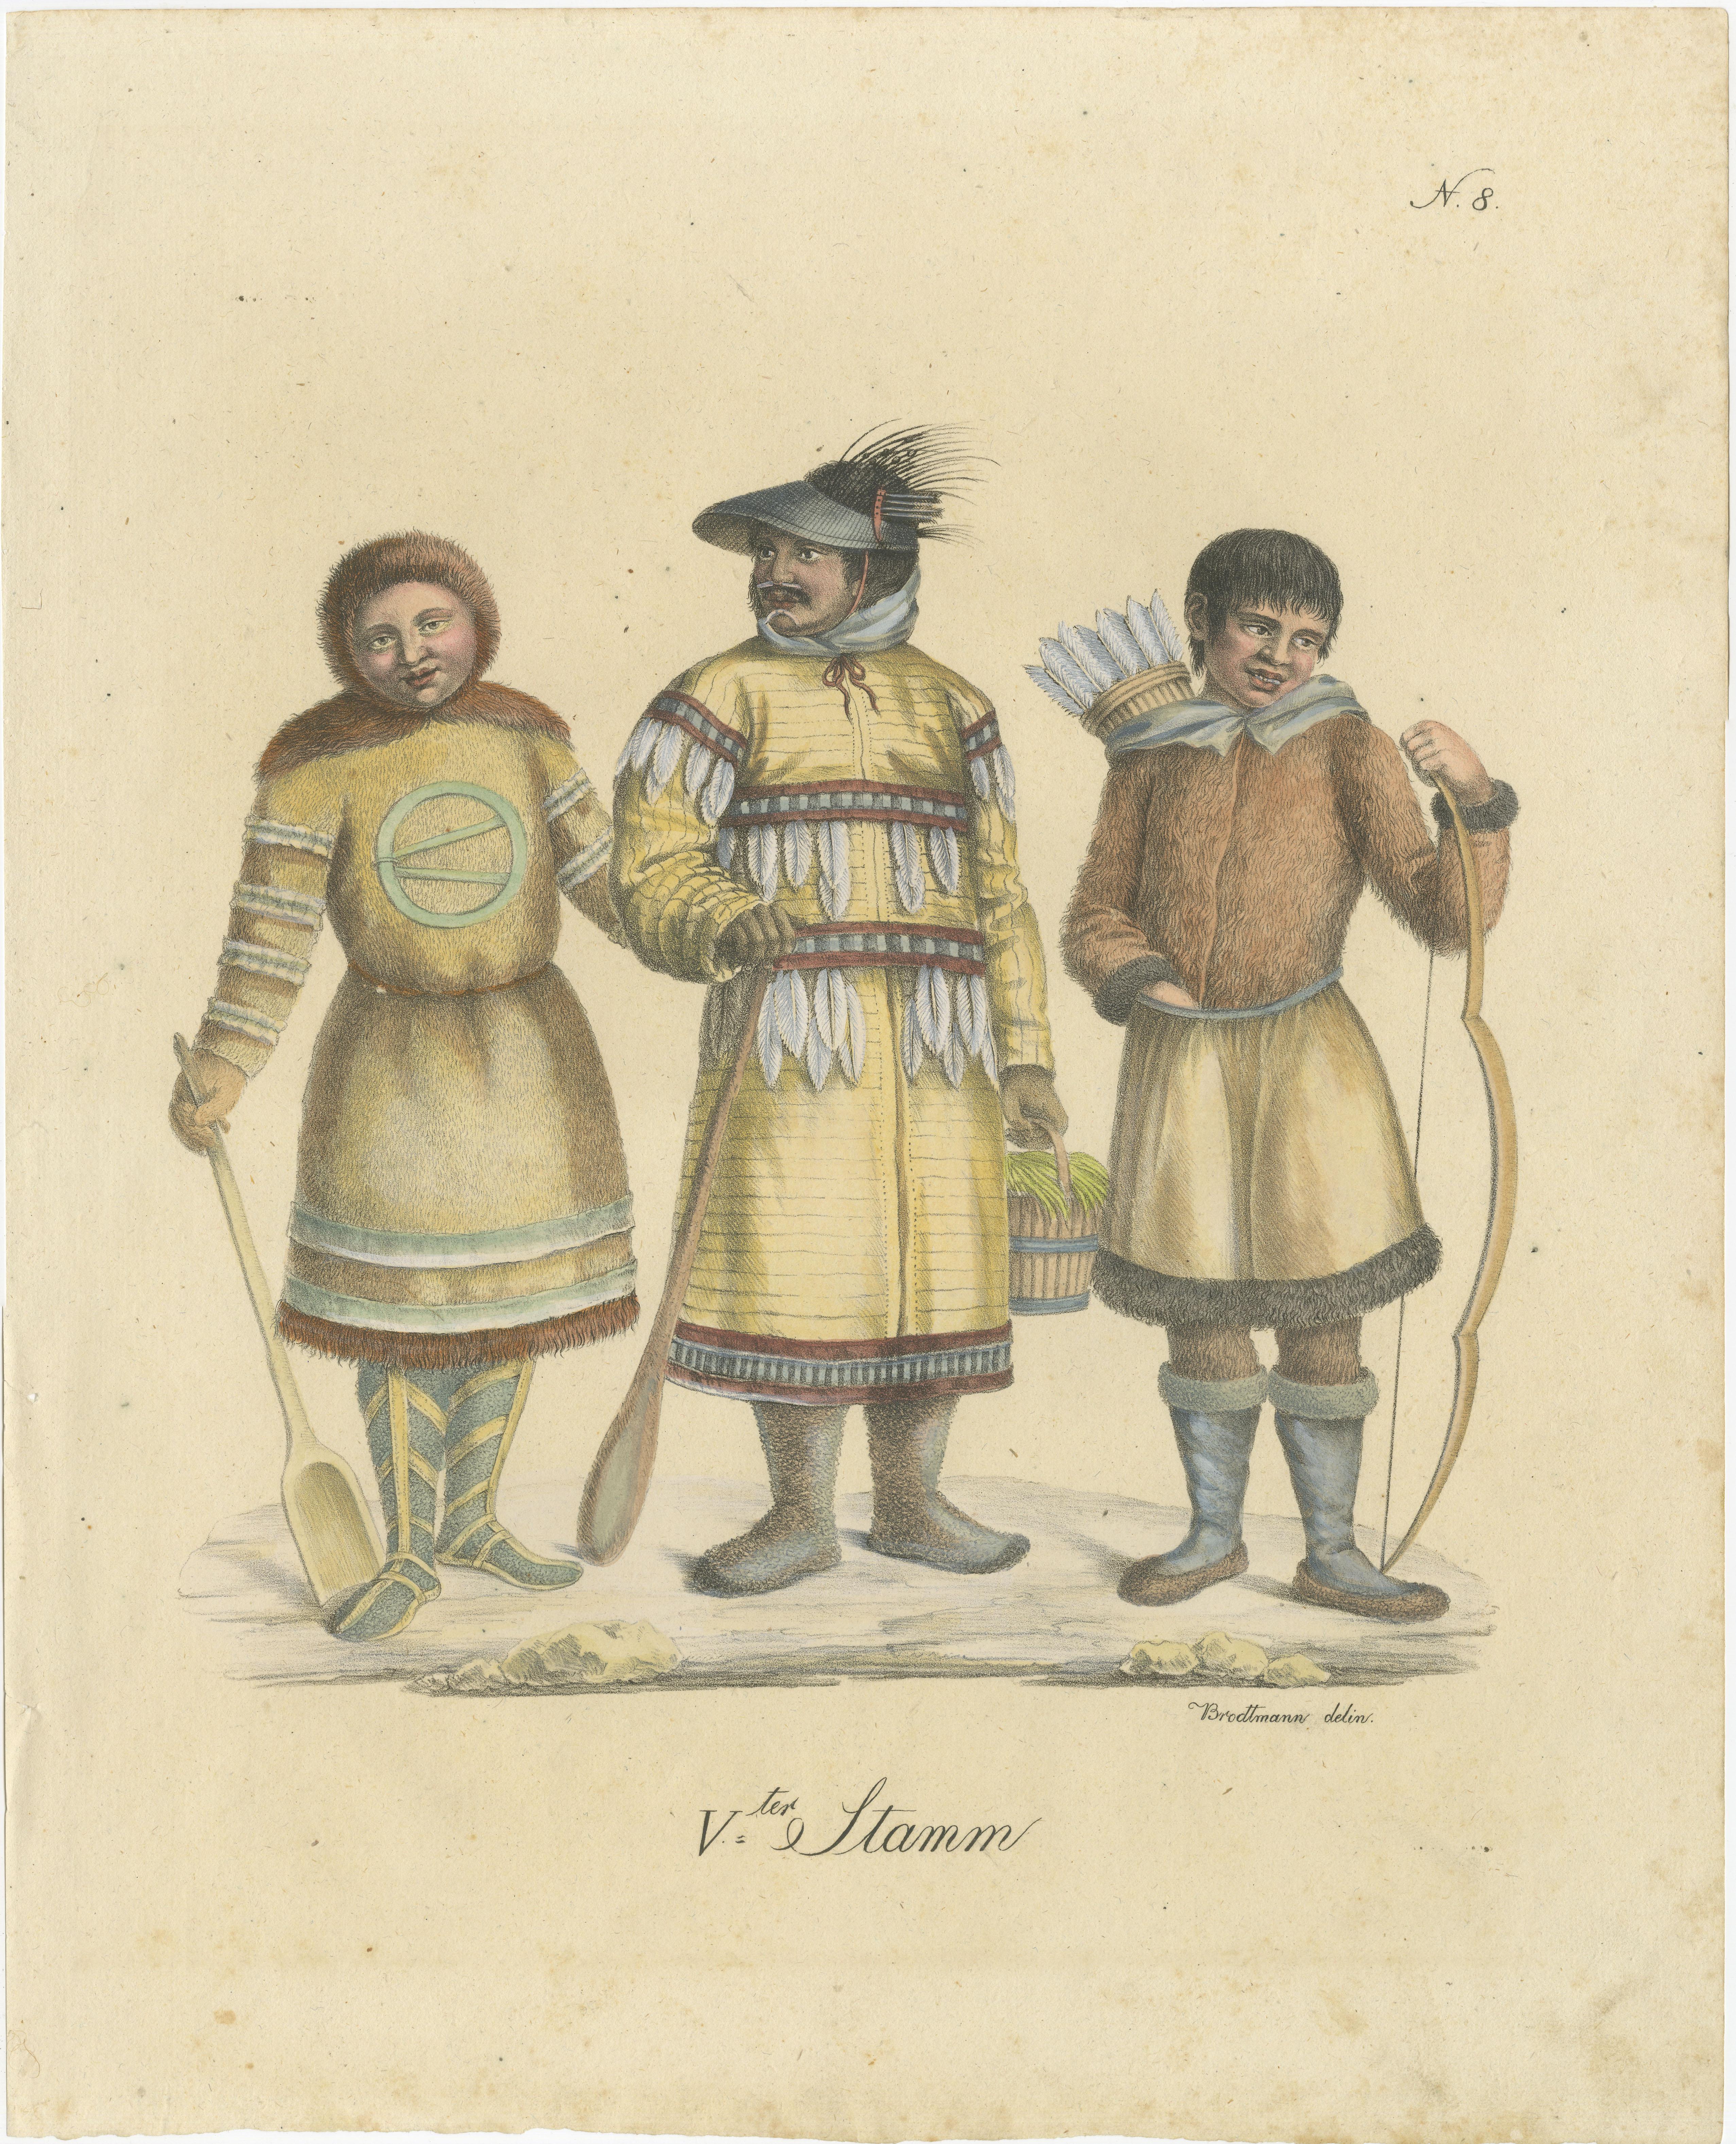 Antique print titled 'Vter Stamm'. Lithograph of a man from Unalaska, a Nenet (also known as Samoyed) woman and an eskimo. This print originates from 'Naturhistorische Bilder-Galerie' by Brodtmann. Published circa 1816. 